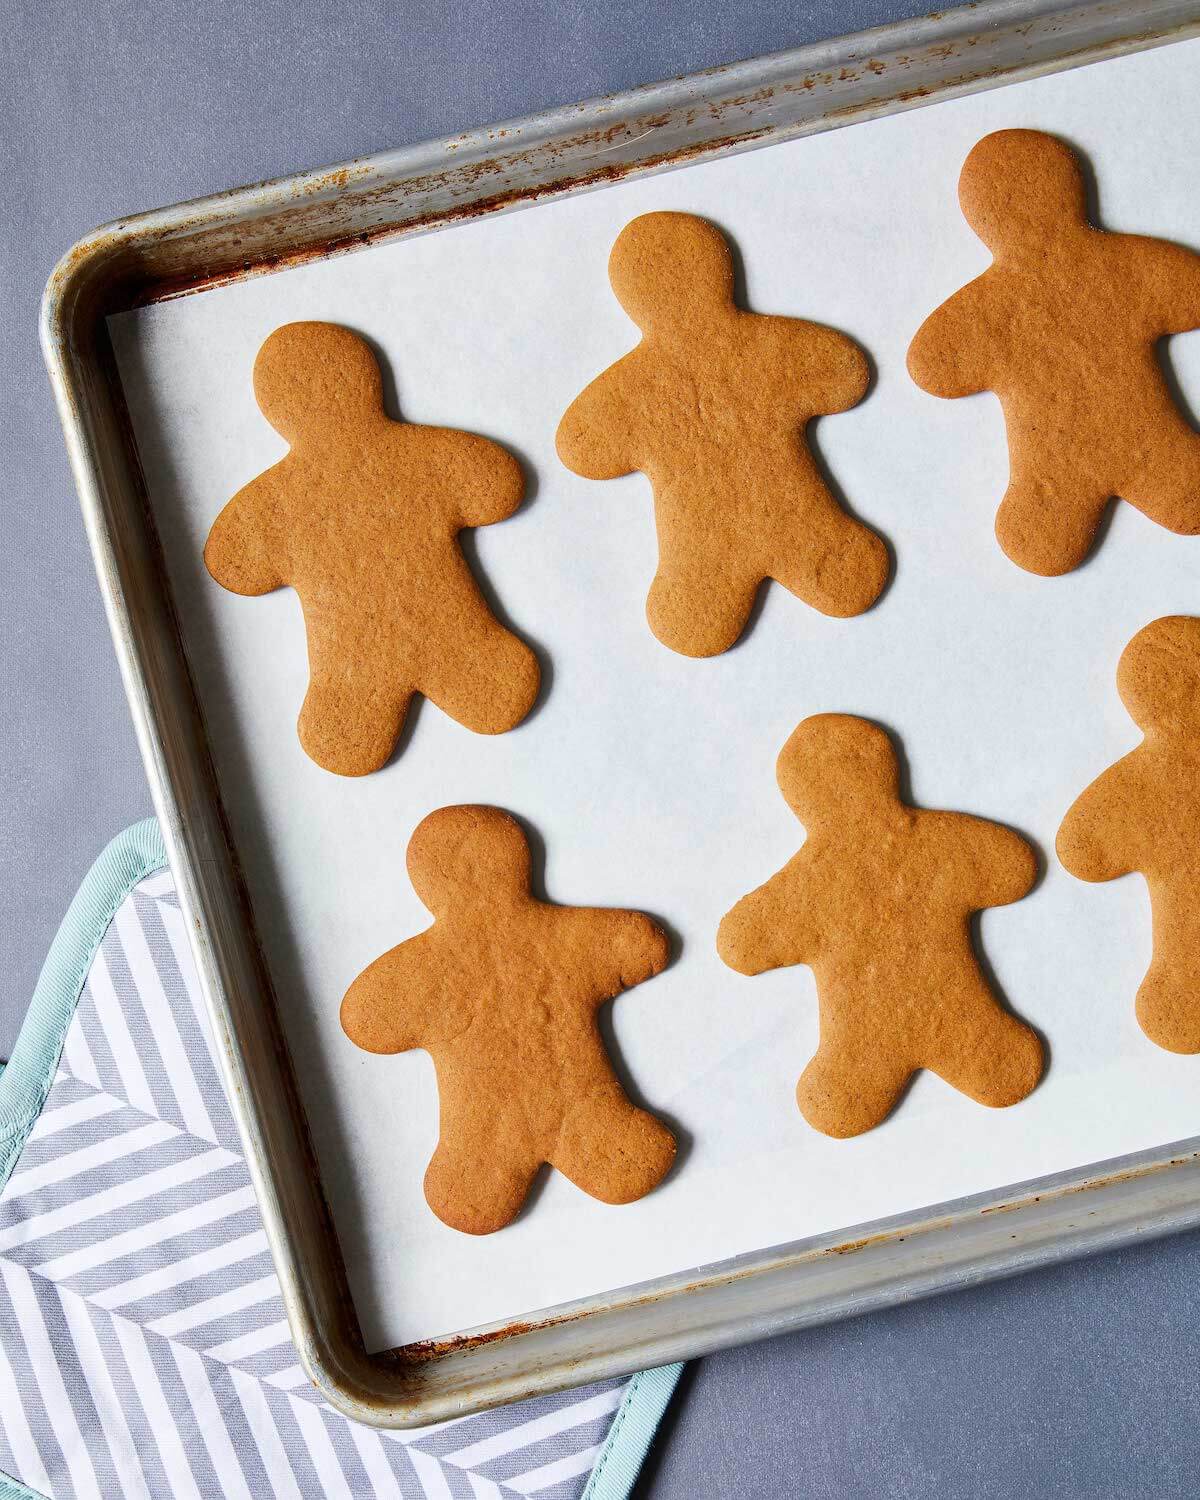 cut out and baked classic gingerbread men